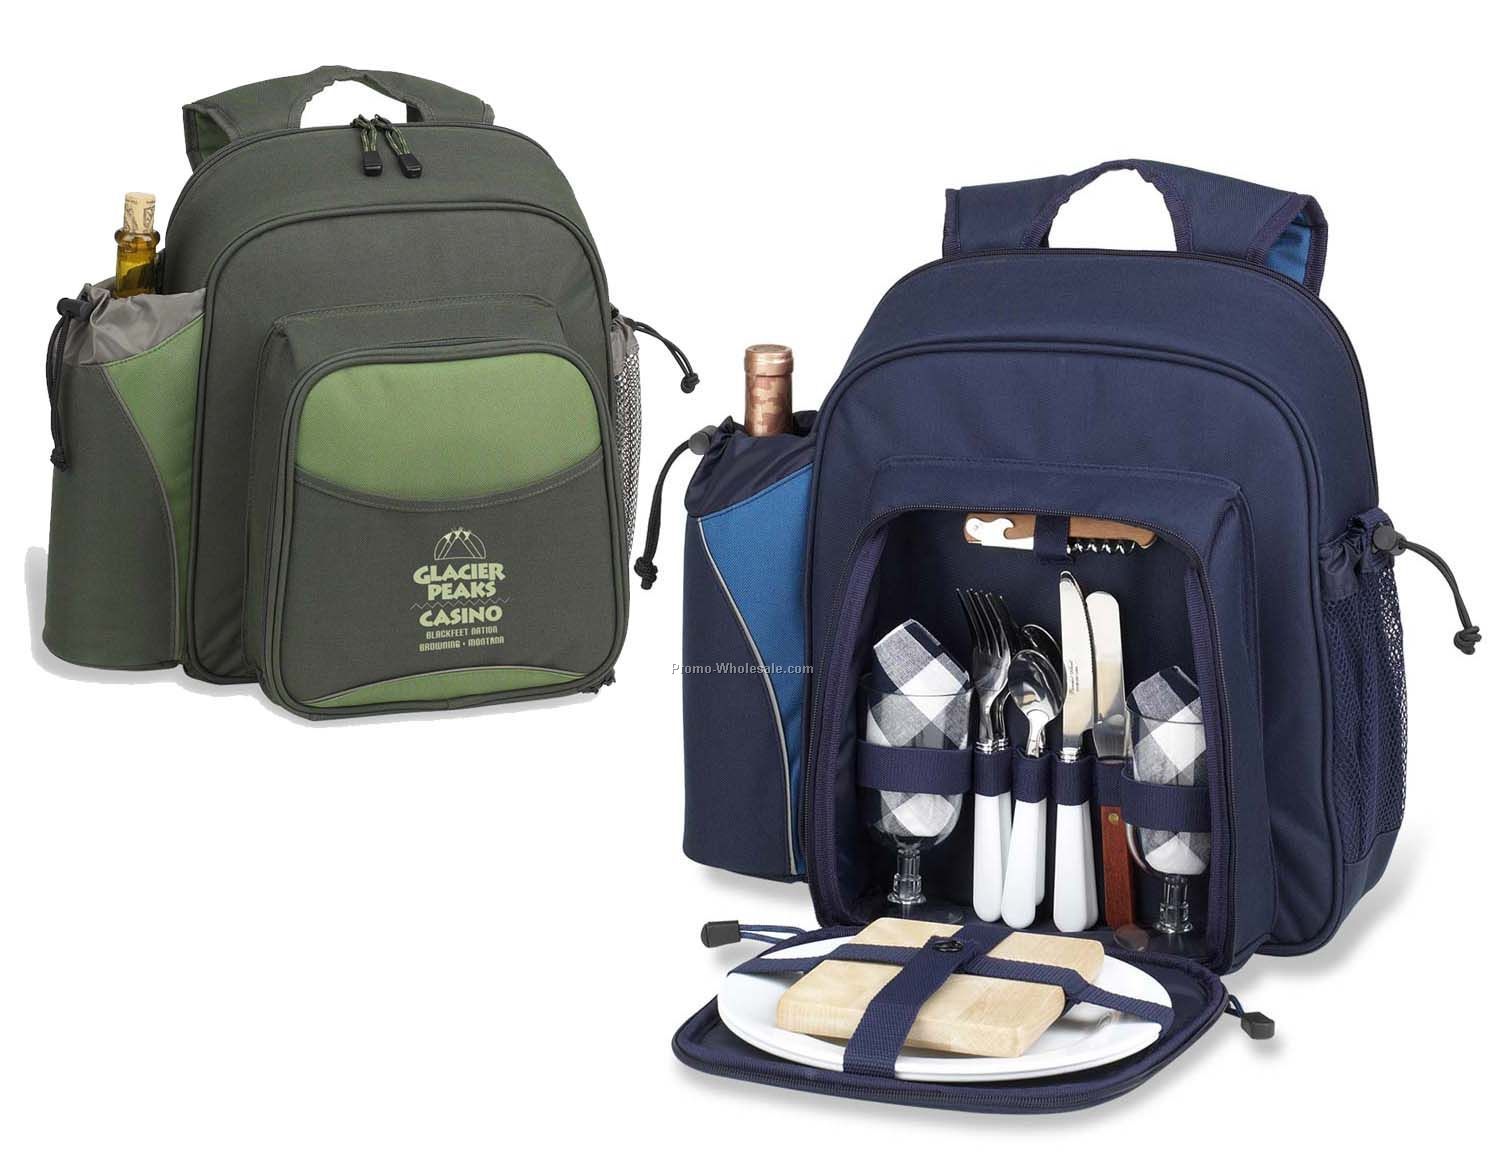 15"x16"x7" Picnic Backpack For Two